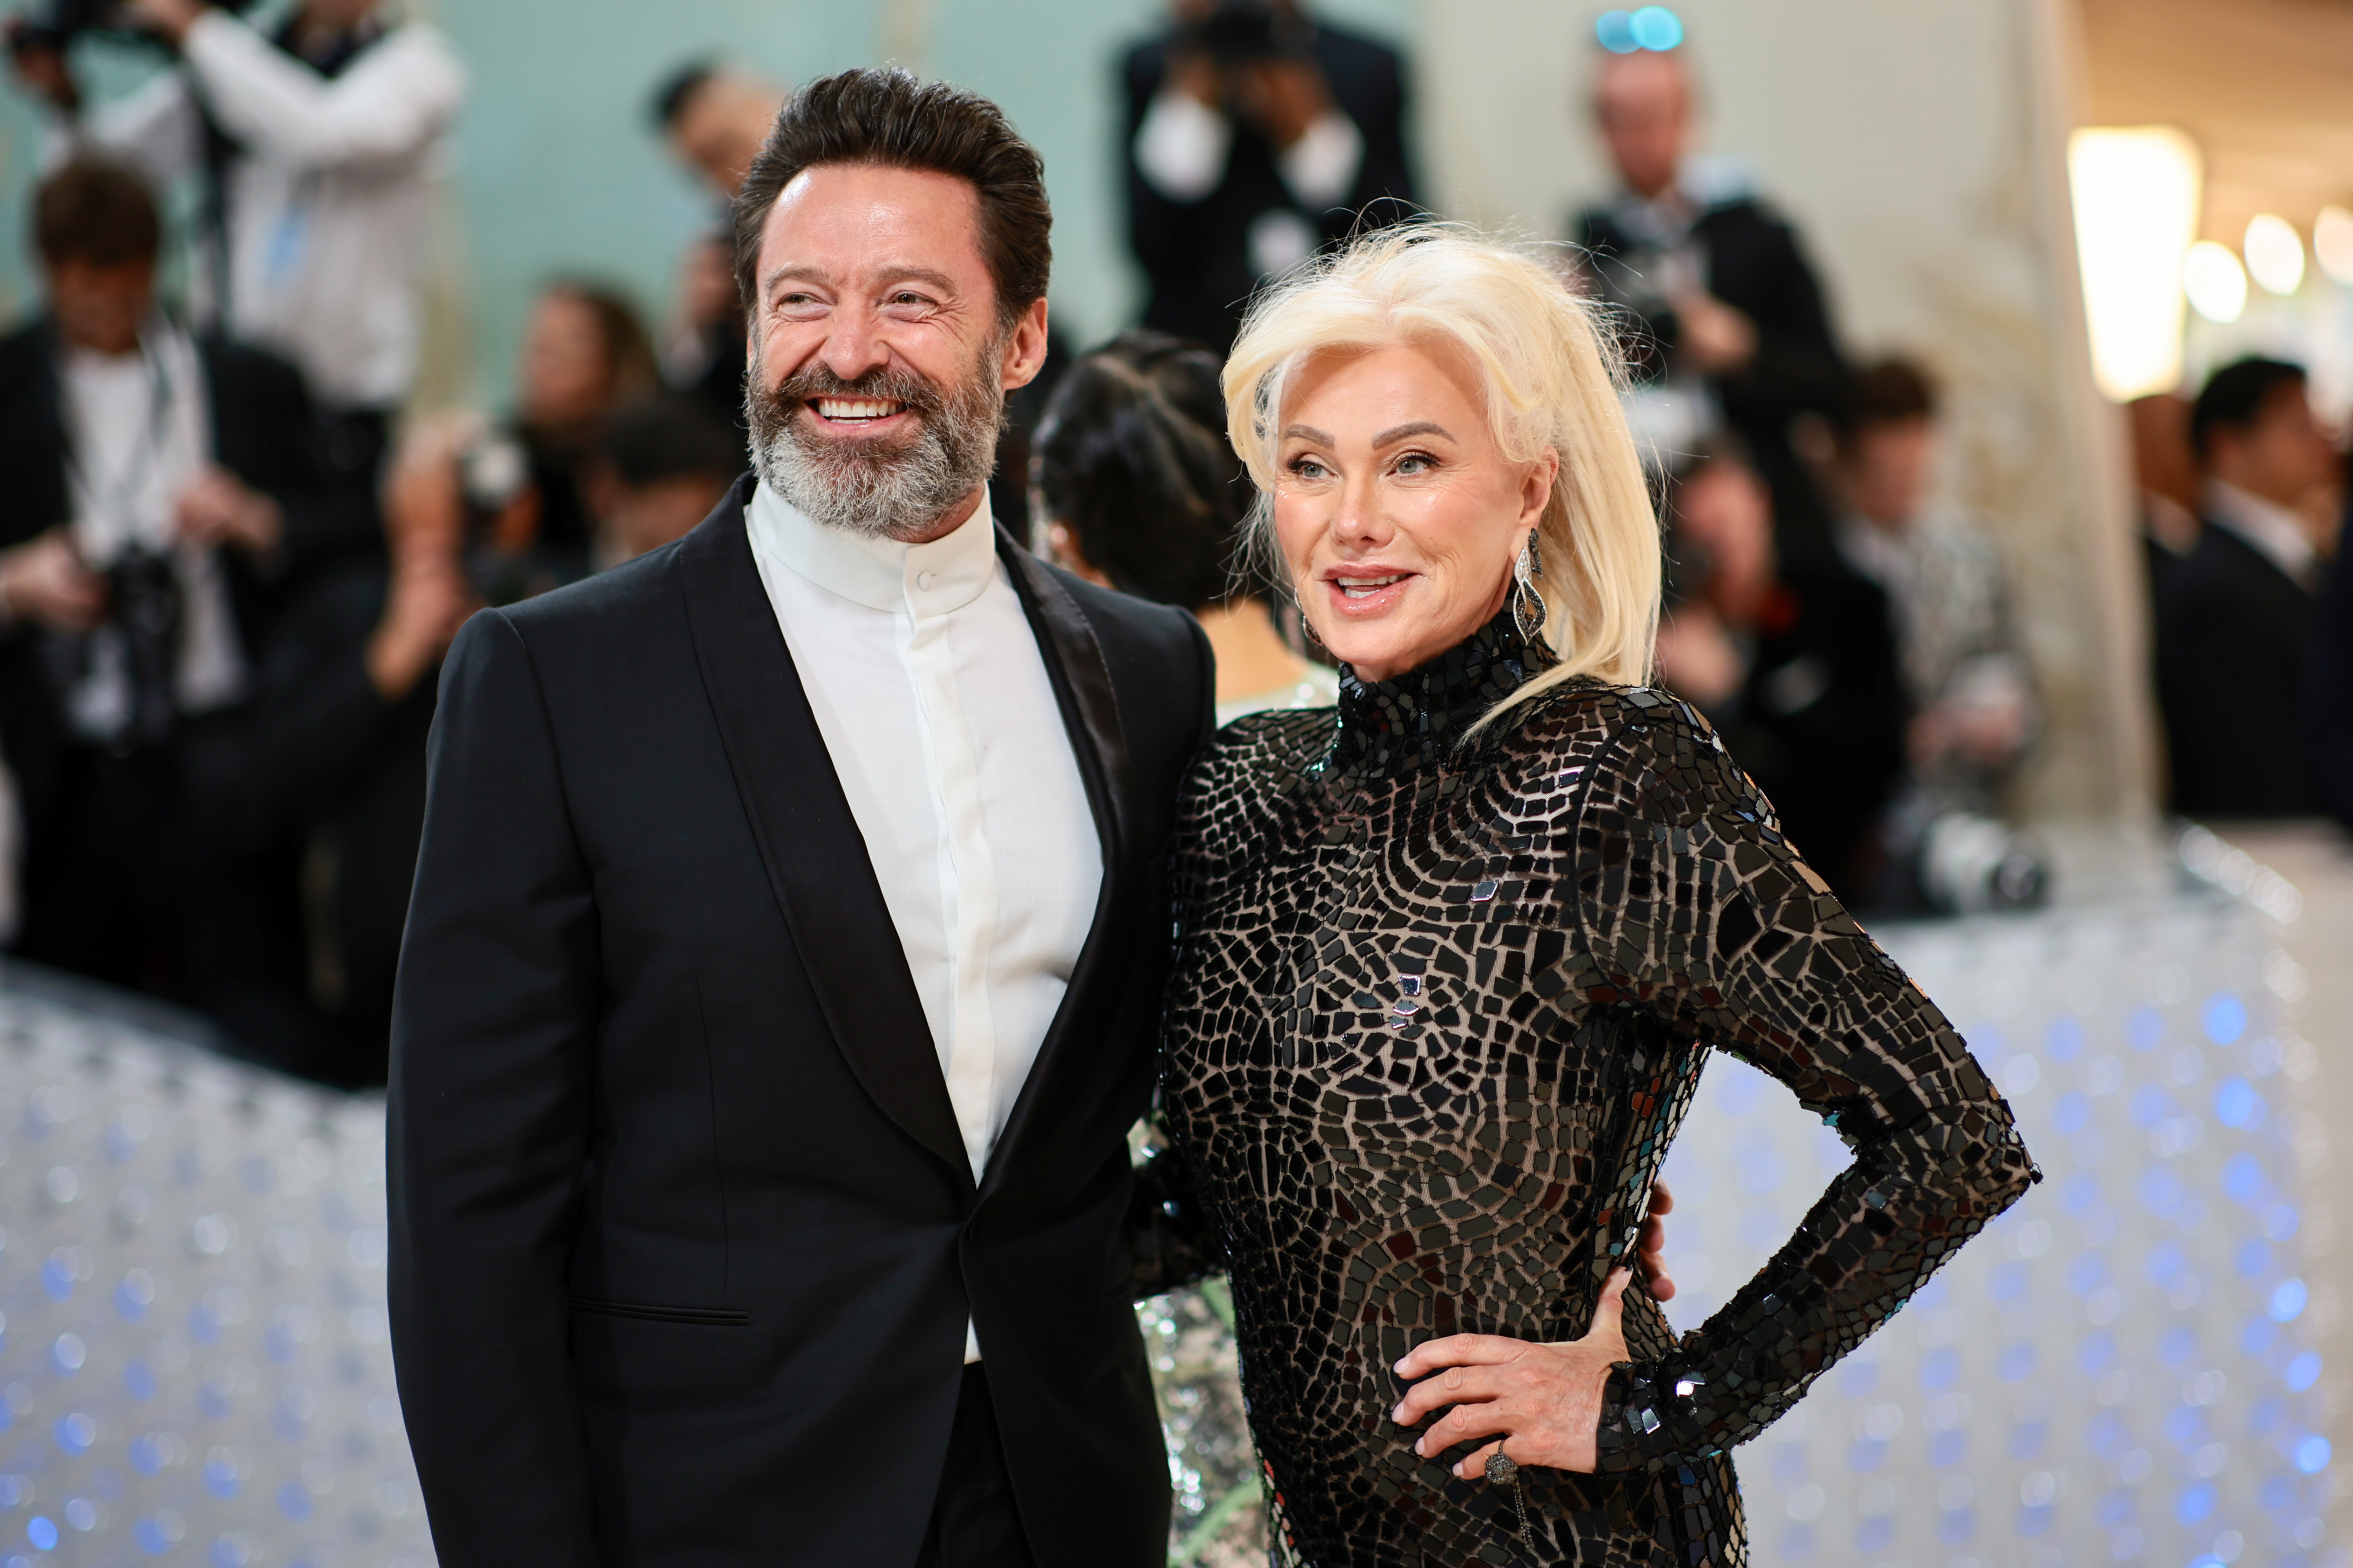 Hugh Jackman and Deborra-Lee Furness at The Met Gala in New York City on May 1, 2023 | Source: Getty Images